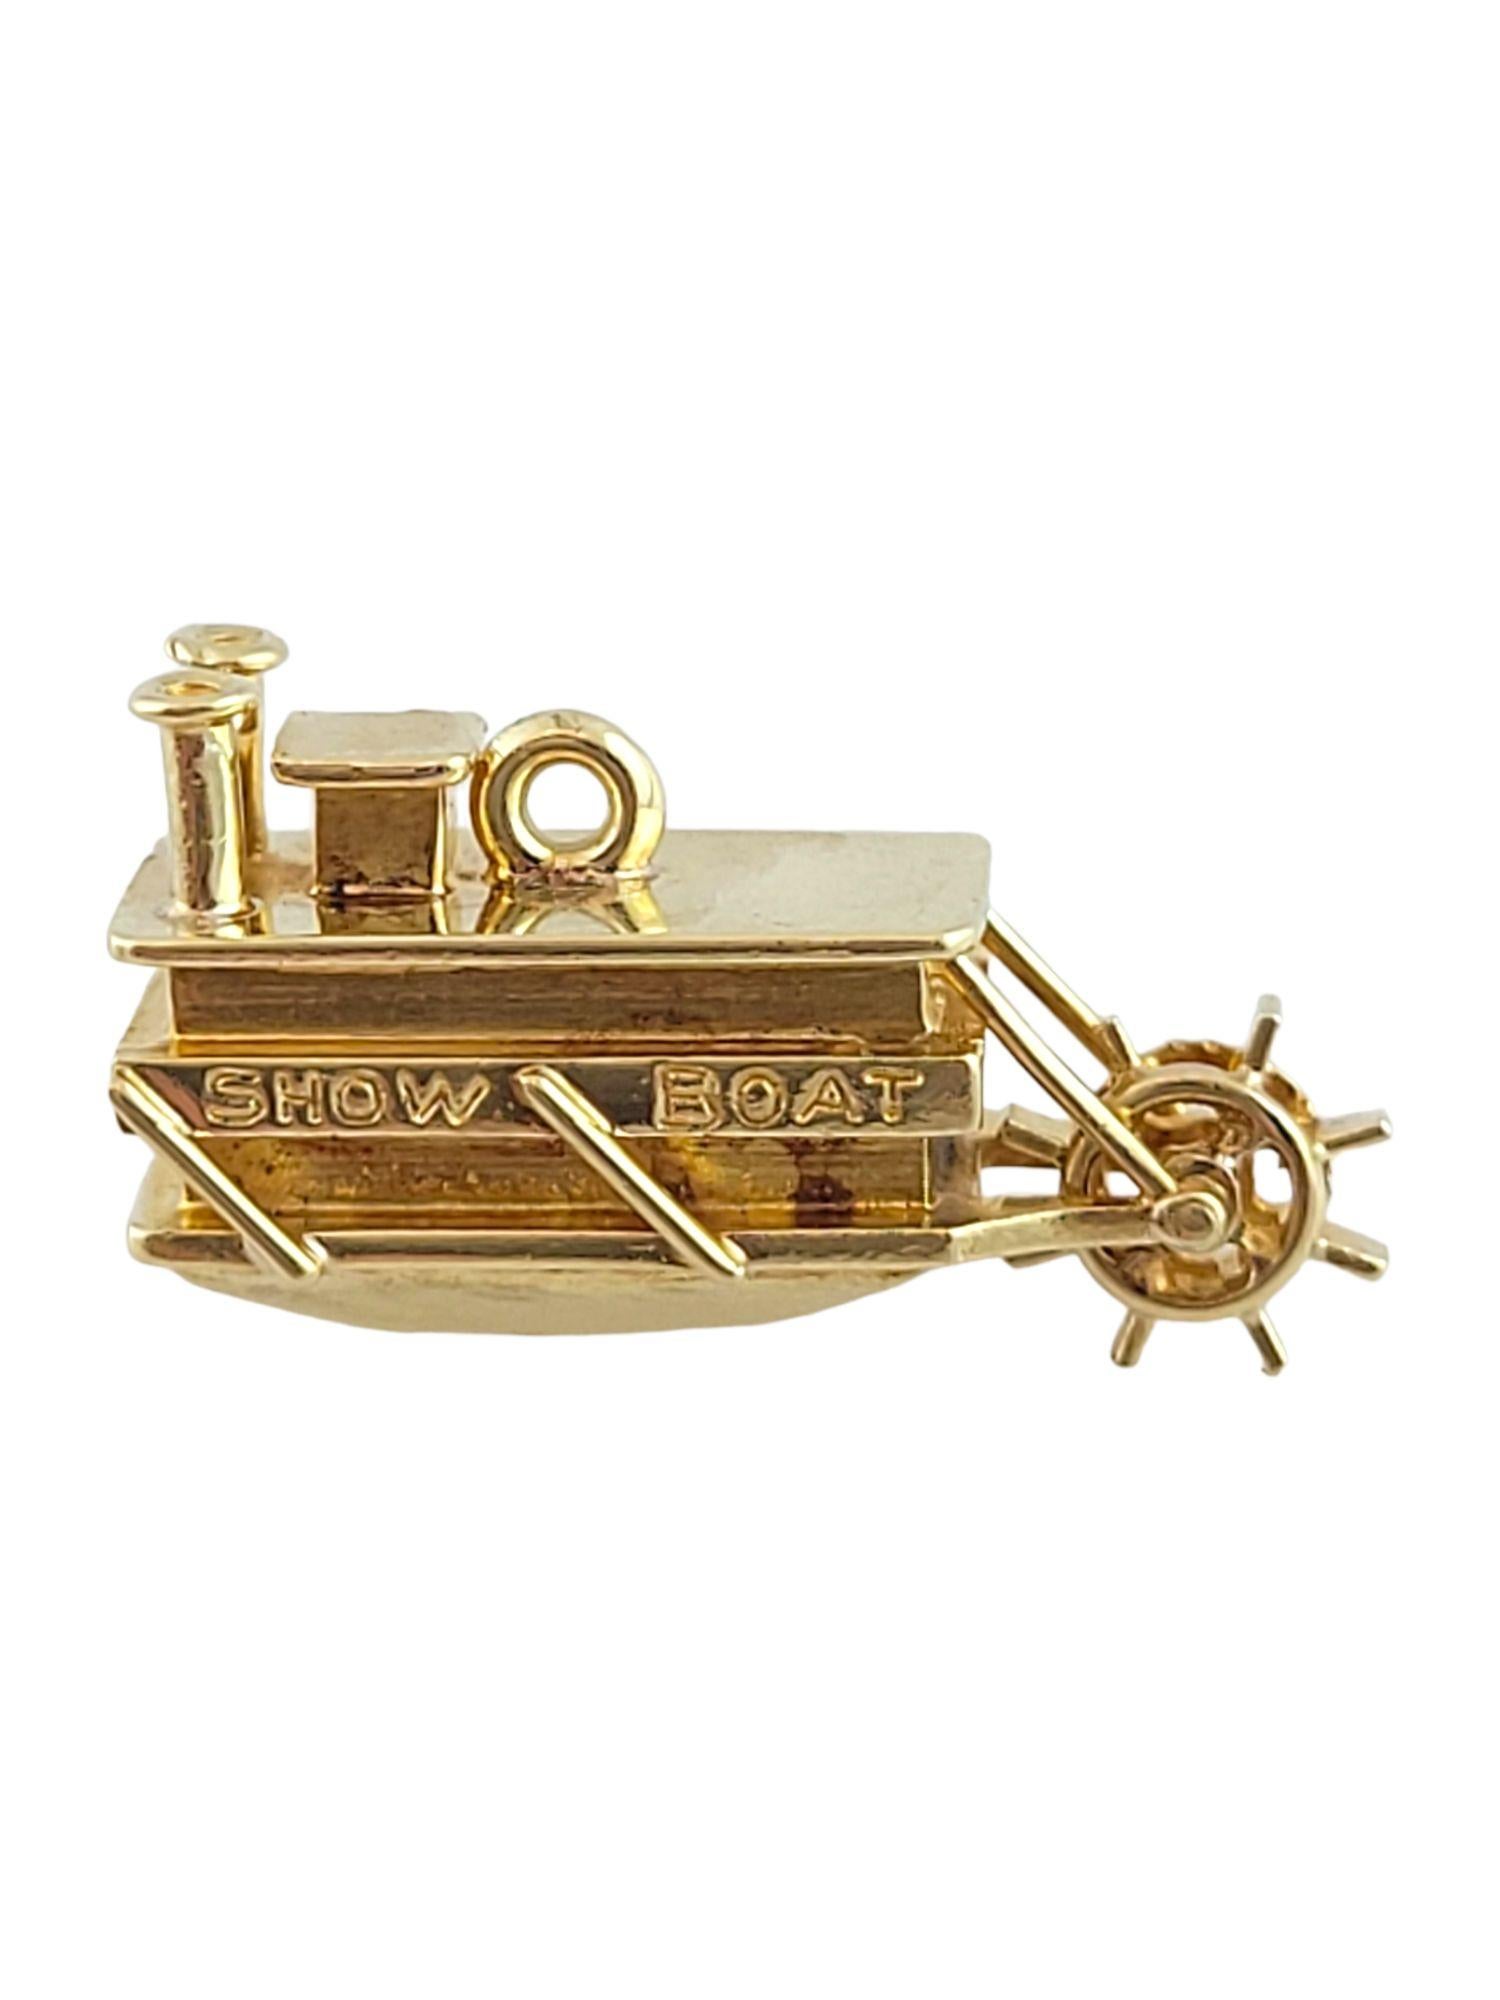  14K Yellow Gold Show Boat Charm #14803 For Sale 1